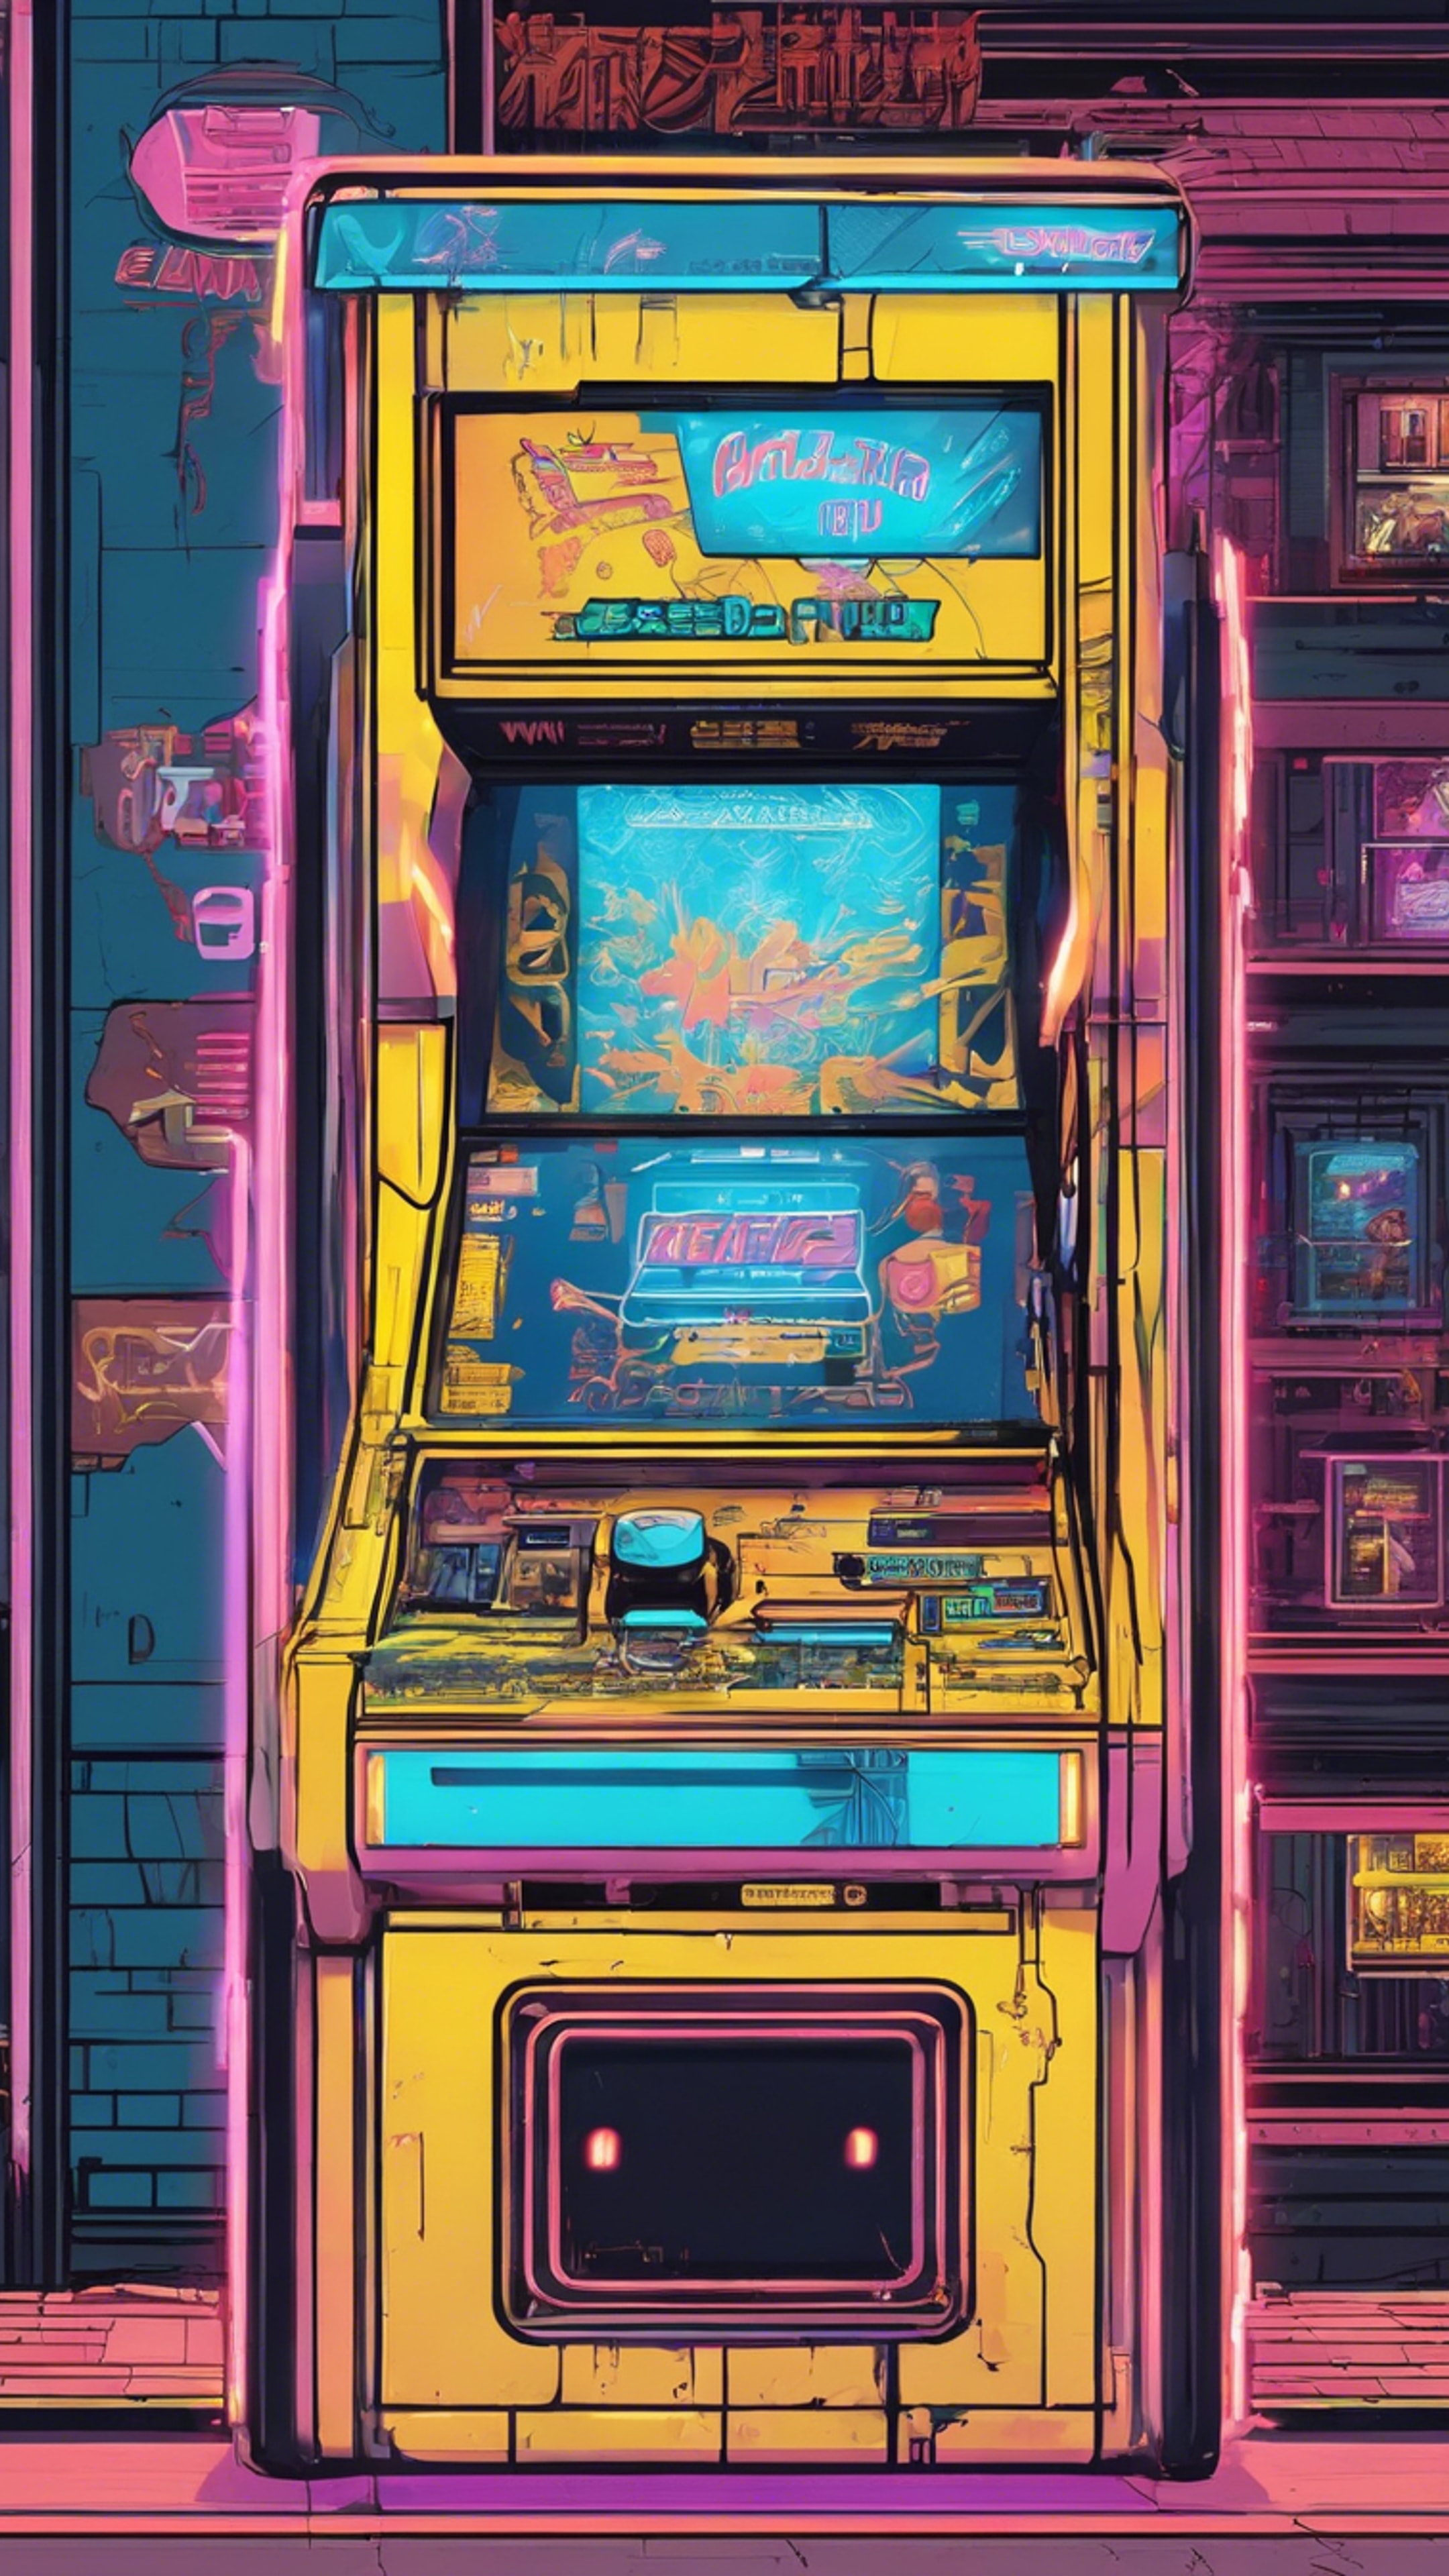 A vintage arcade machine with blue and yellow detailing, set in a retro game shop. Tapeet[7a93d221b5de45b8b20a]